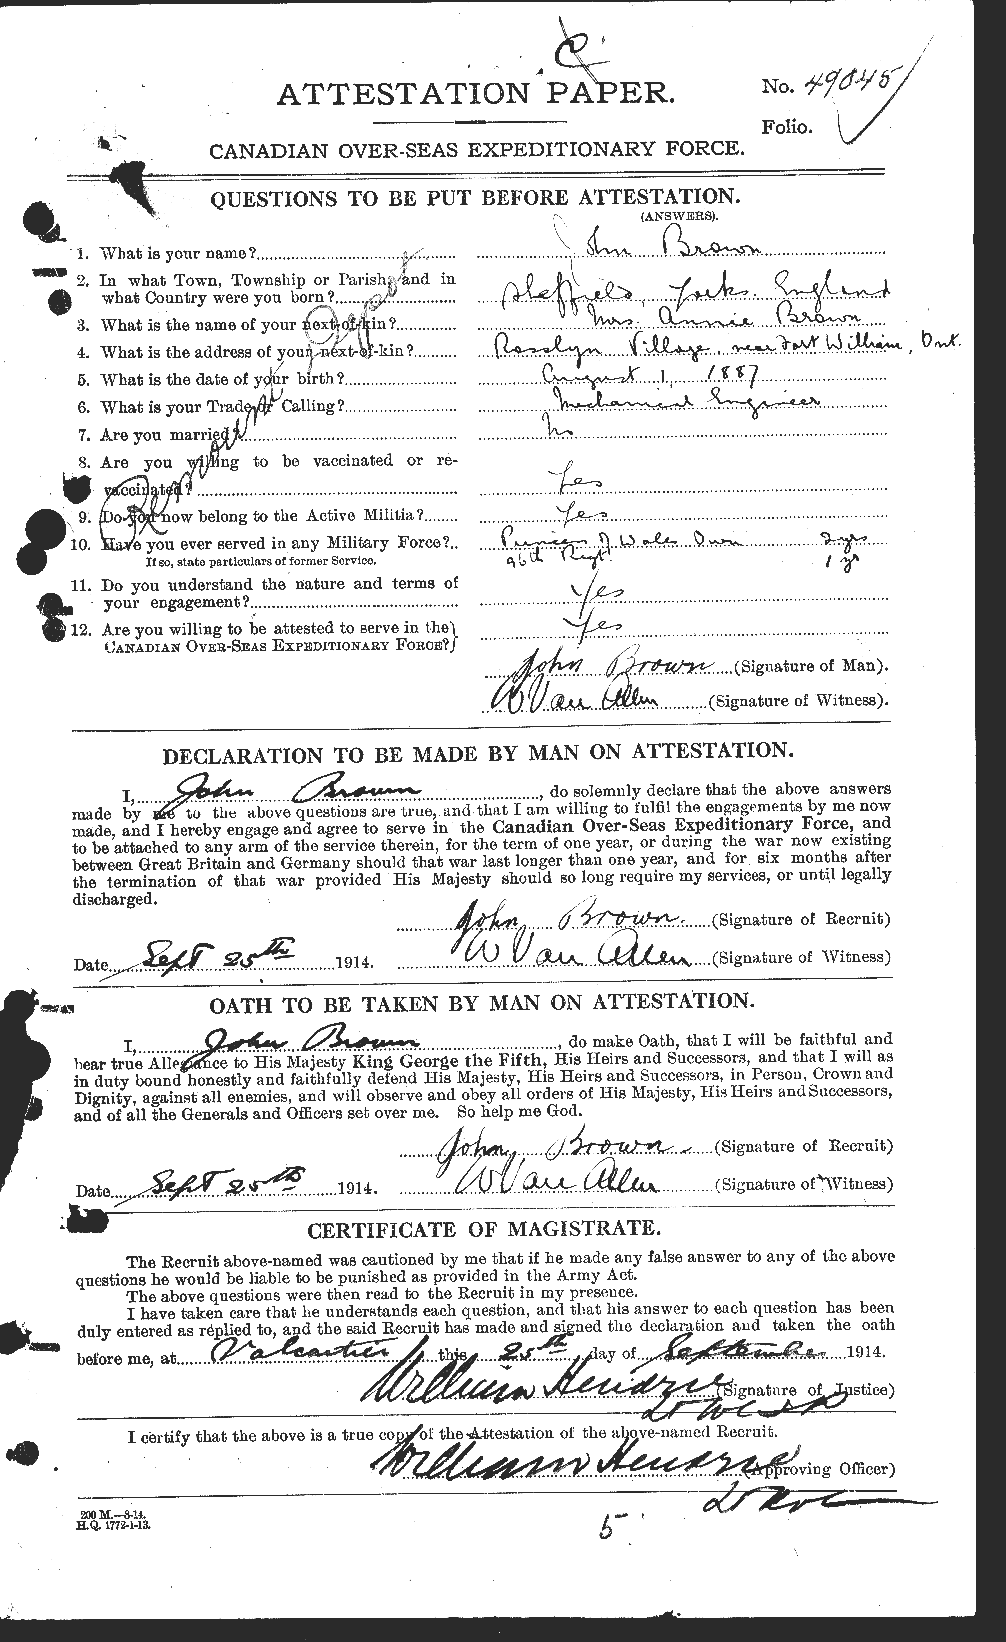 Personnel Records of the First World War - CEF 264555a